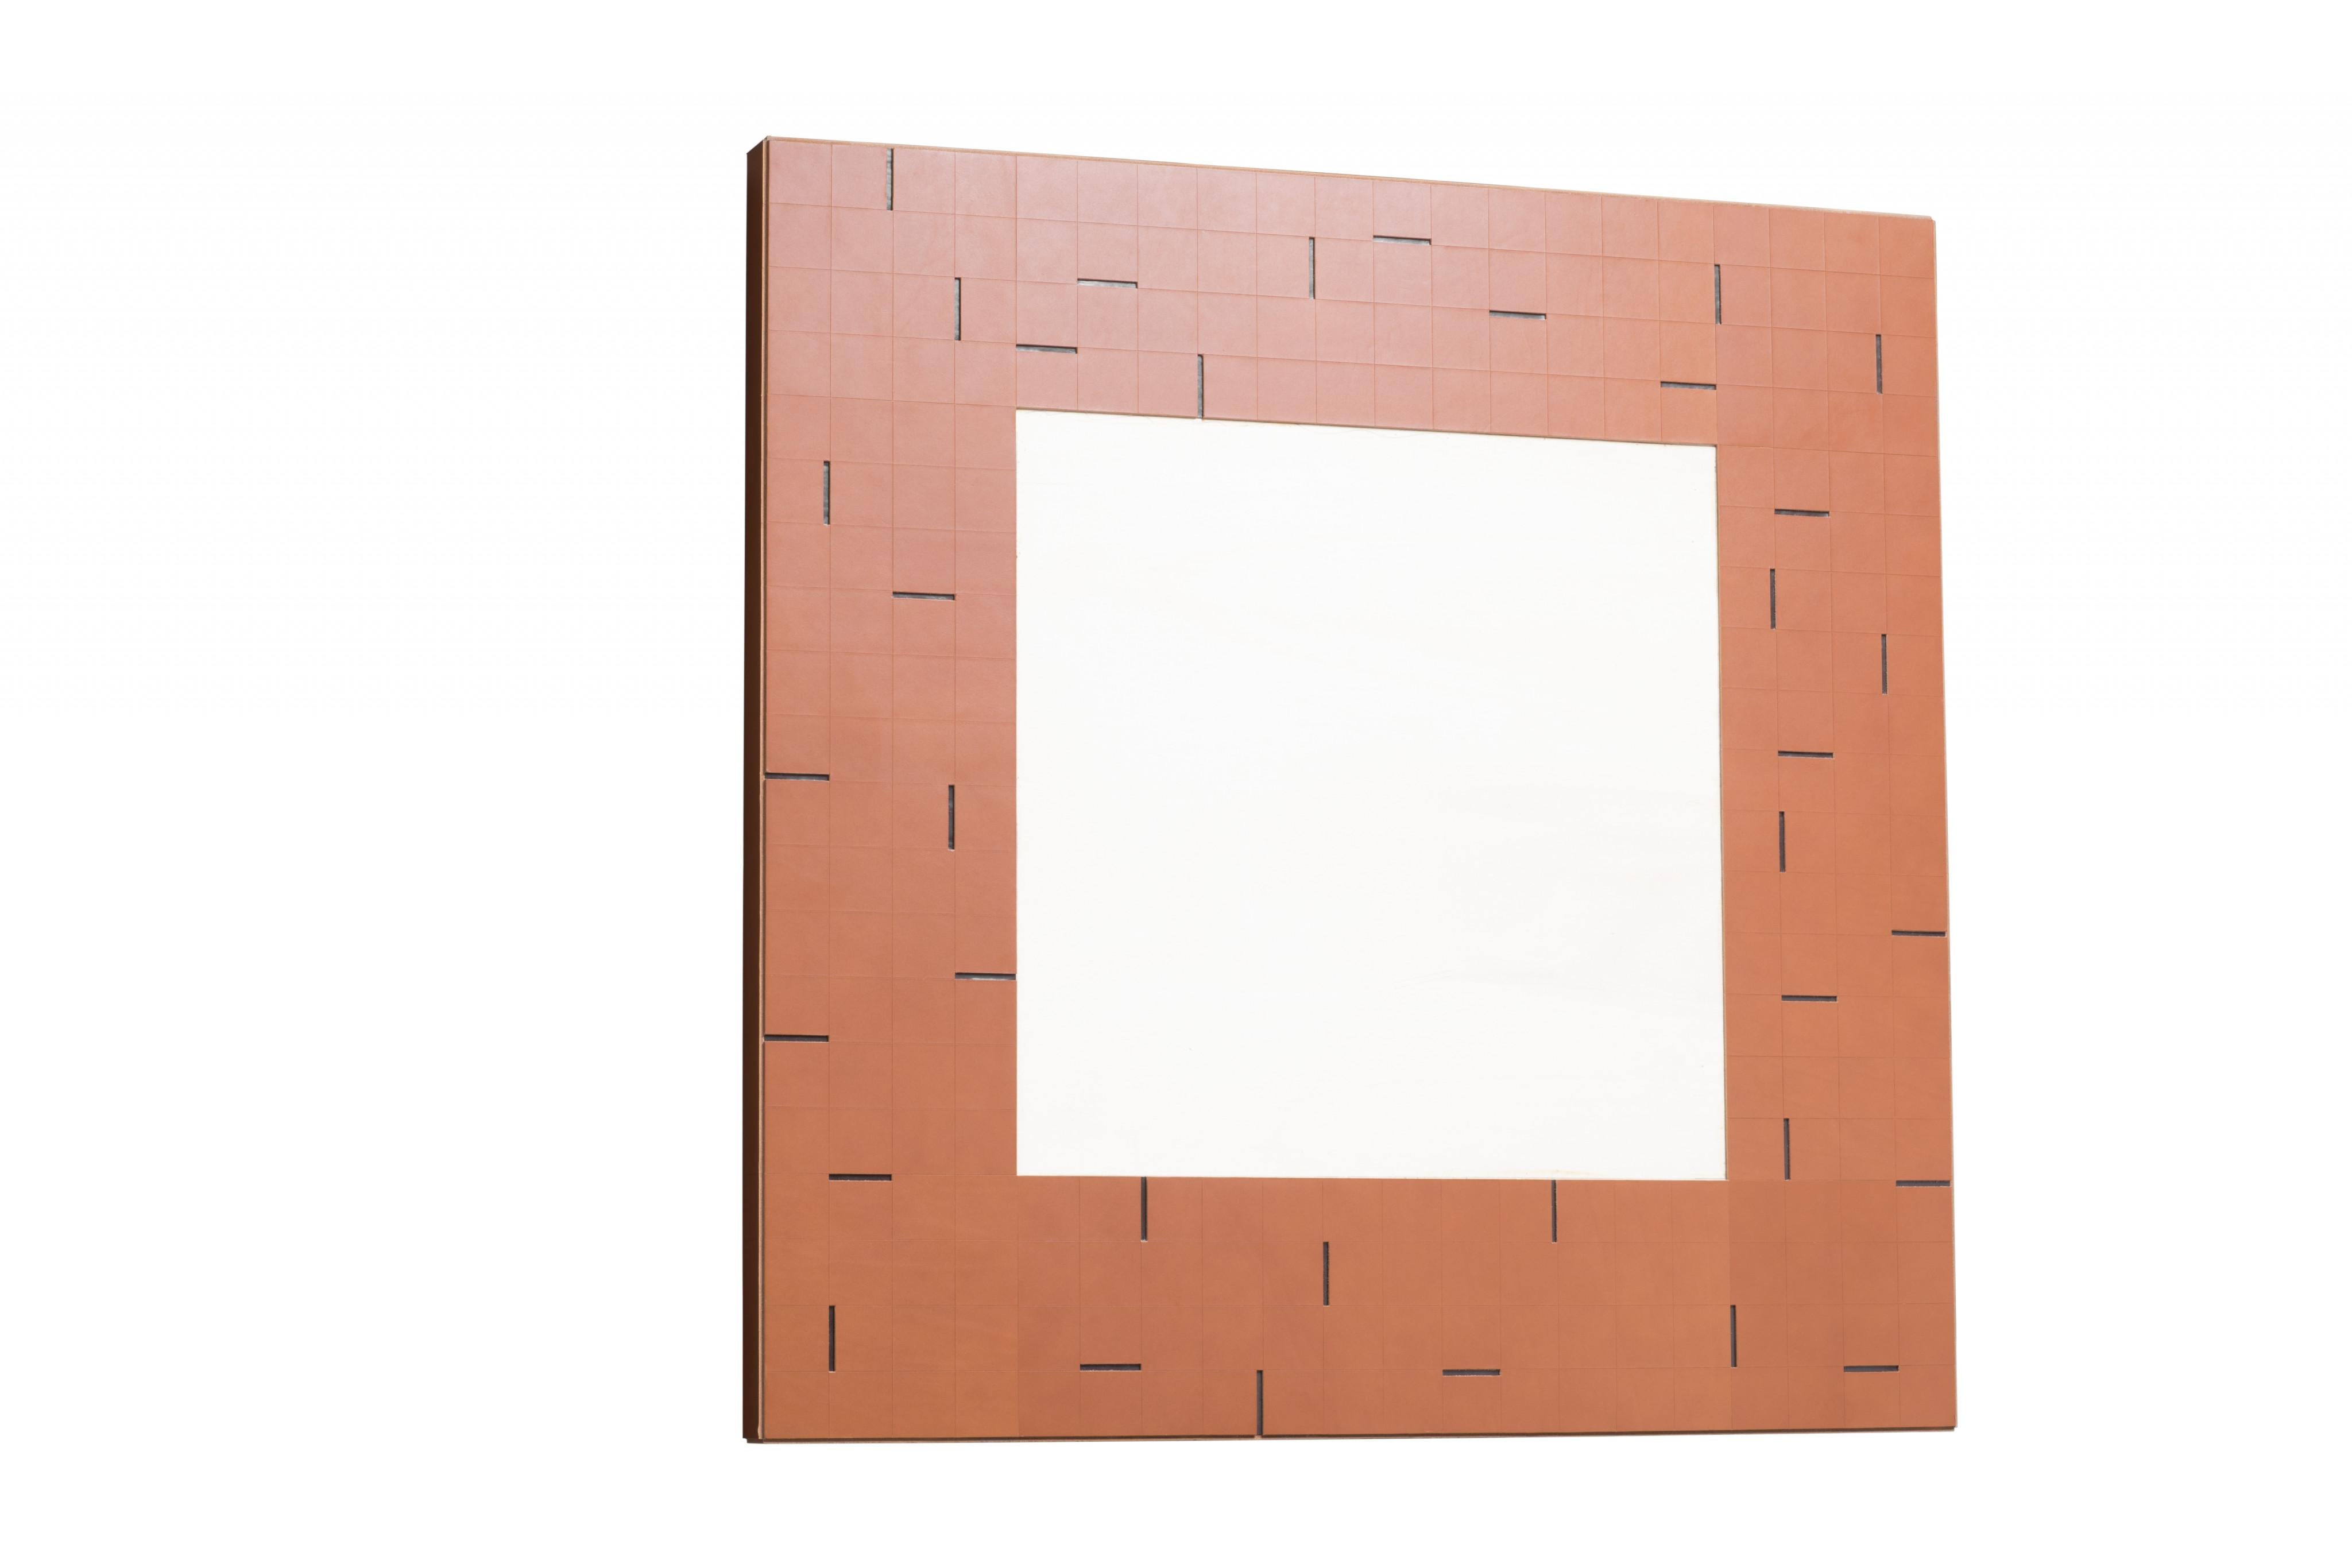 Atari Square Mirror -- Stephane Parmentier x Giobagnara

Available only in saddle leather. See photo for recommended color combinations. Mirror itself measures 60x60 cm.

Embracing sleek designs and beautiful materials, the Stephane Parmentier